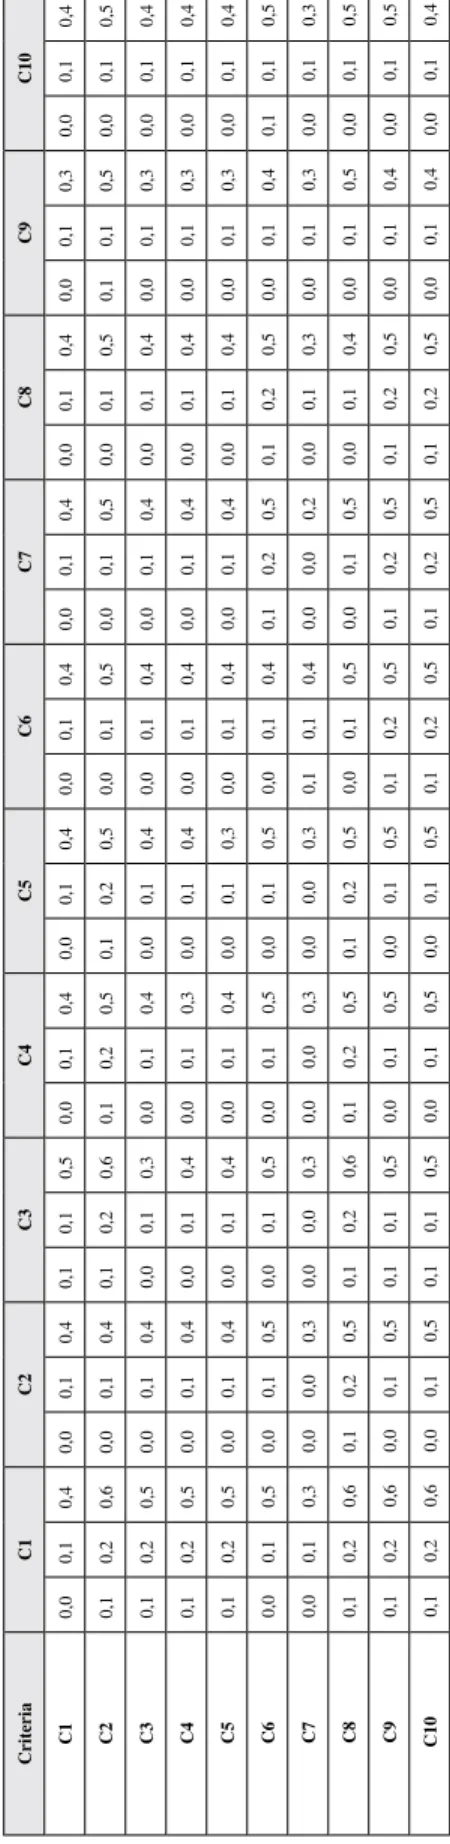 Table 7. The total-relation fuzzy matrix CriteriaC1C2C3C4C5C6C7C8C9C10 C10,00,10,40,00,10,40,10,10,50,00,10,40,00,10,40,00,10,40,00,10,40,00,10,40,00,10,30,00,10,4 C20,10,20,60,00,10,40,10,20,60,10,20,50,10,20,50,00,10,50,00,10,50,00,10,50,10,10,50,00,10,5